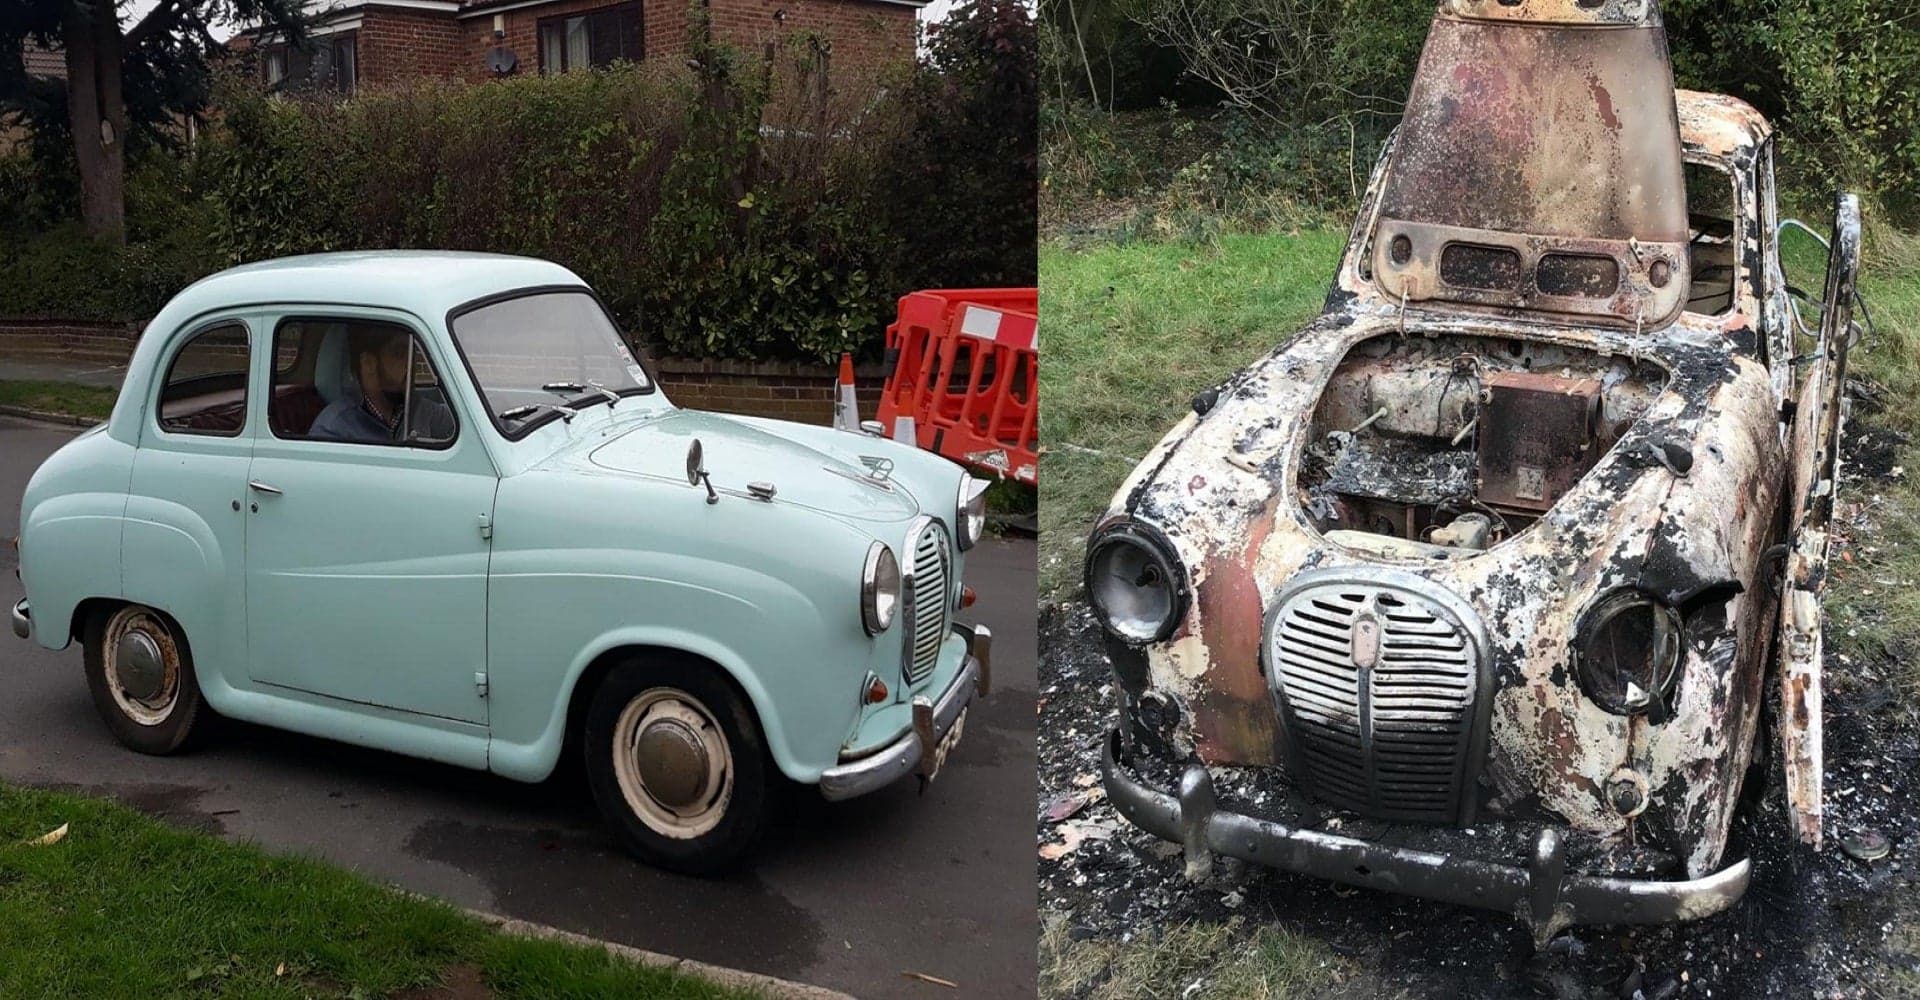 Adorable Austin A35 Stolen From Owner and Set Ablaze by Heartless Vandals